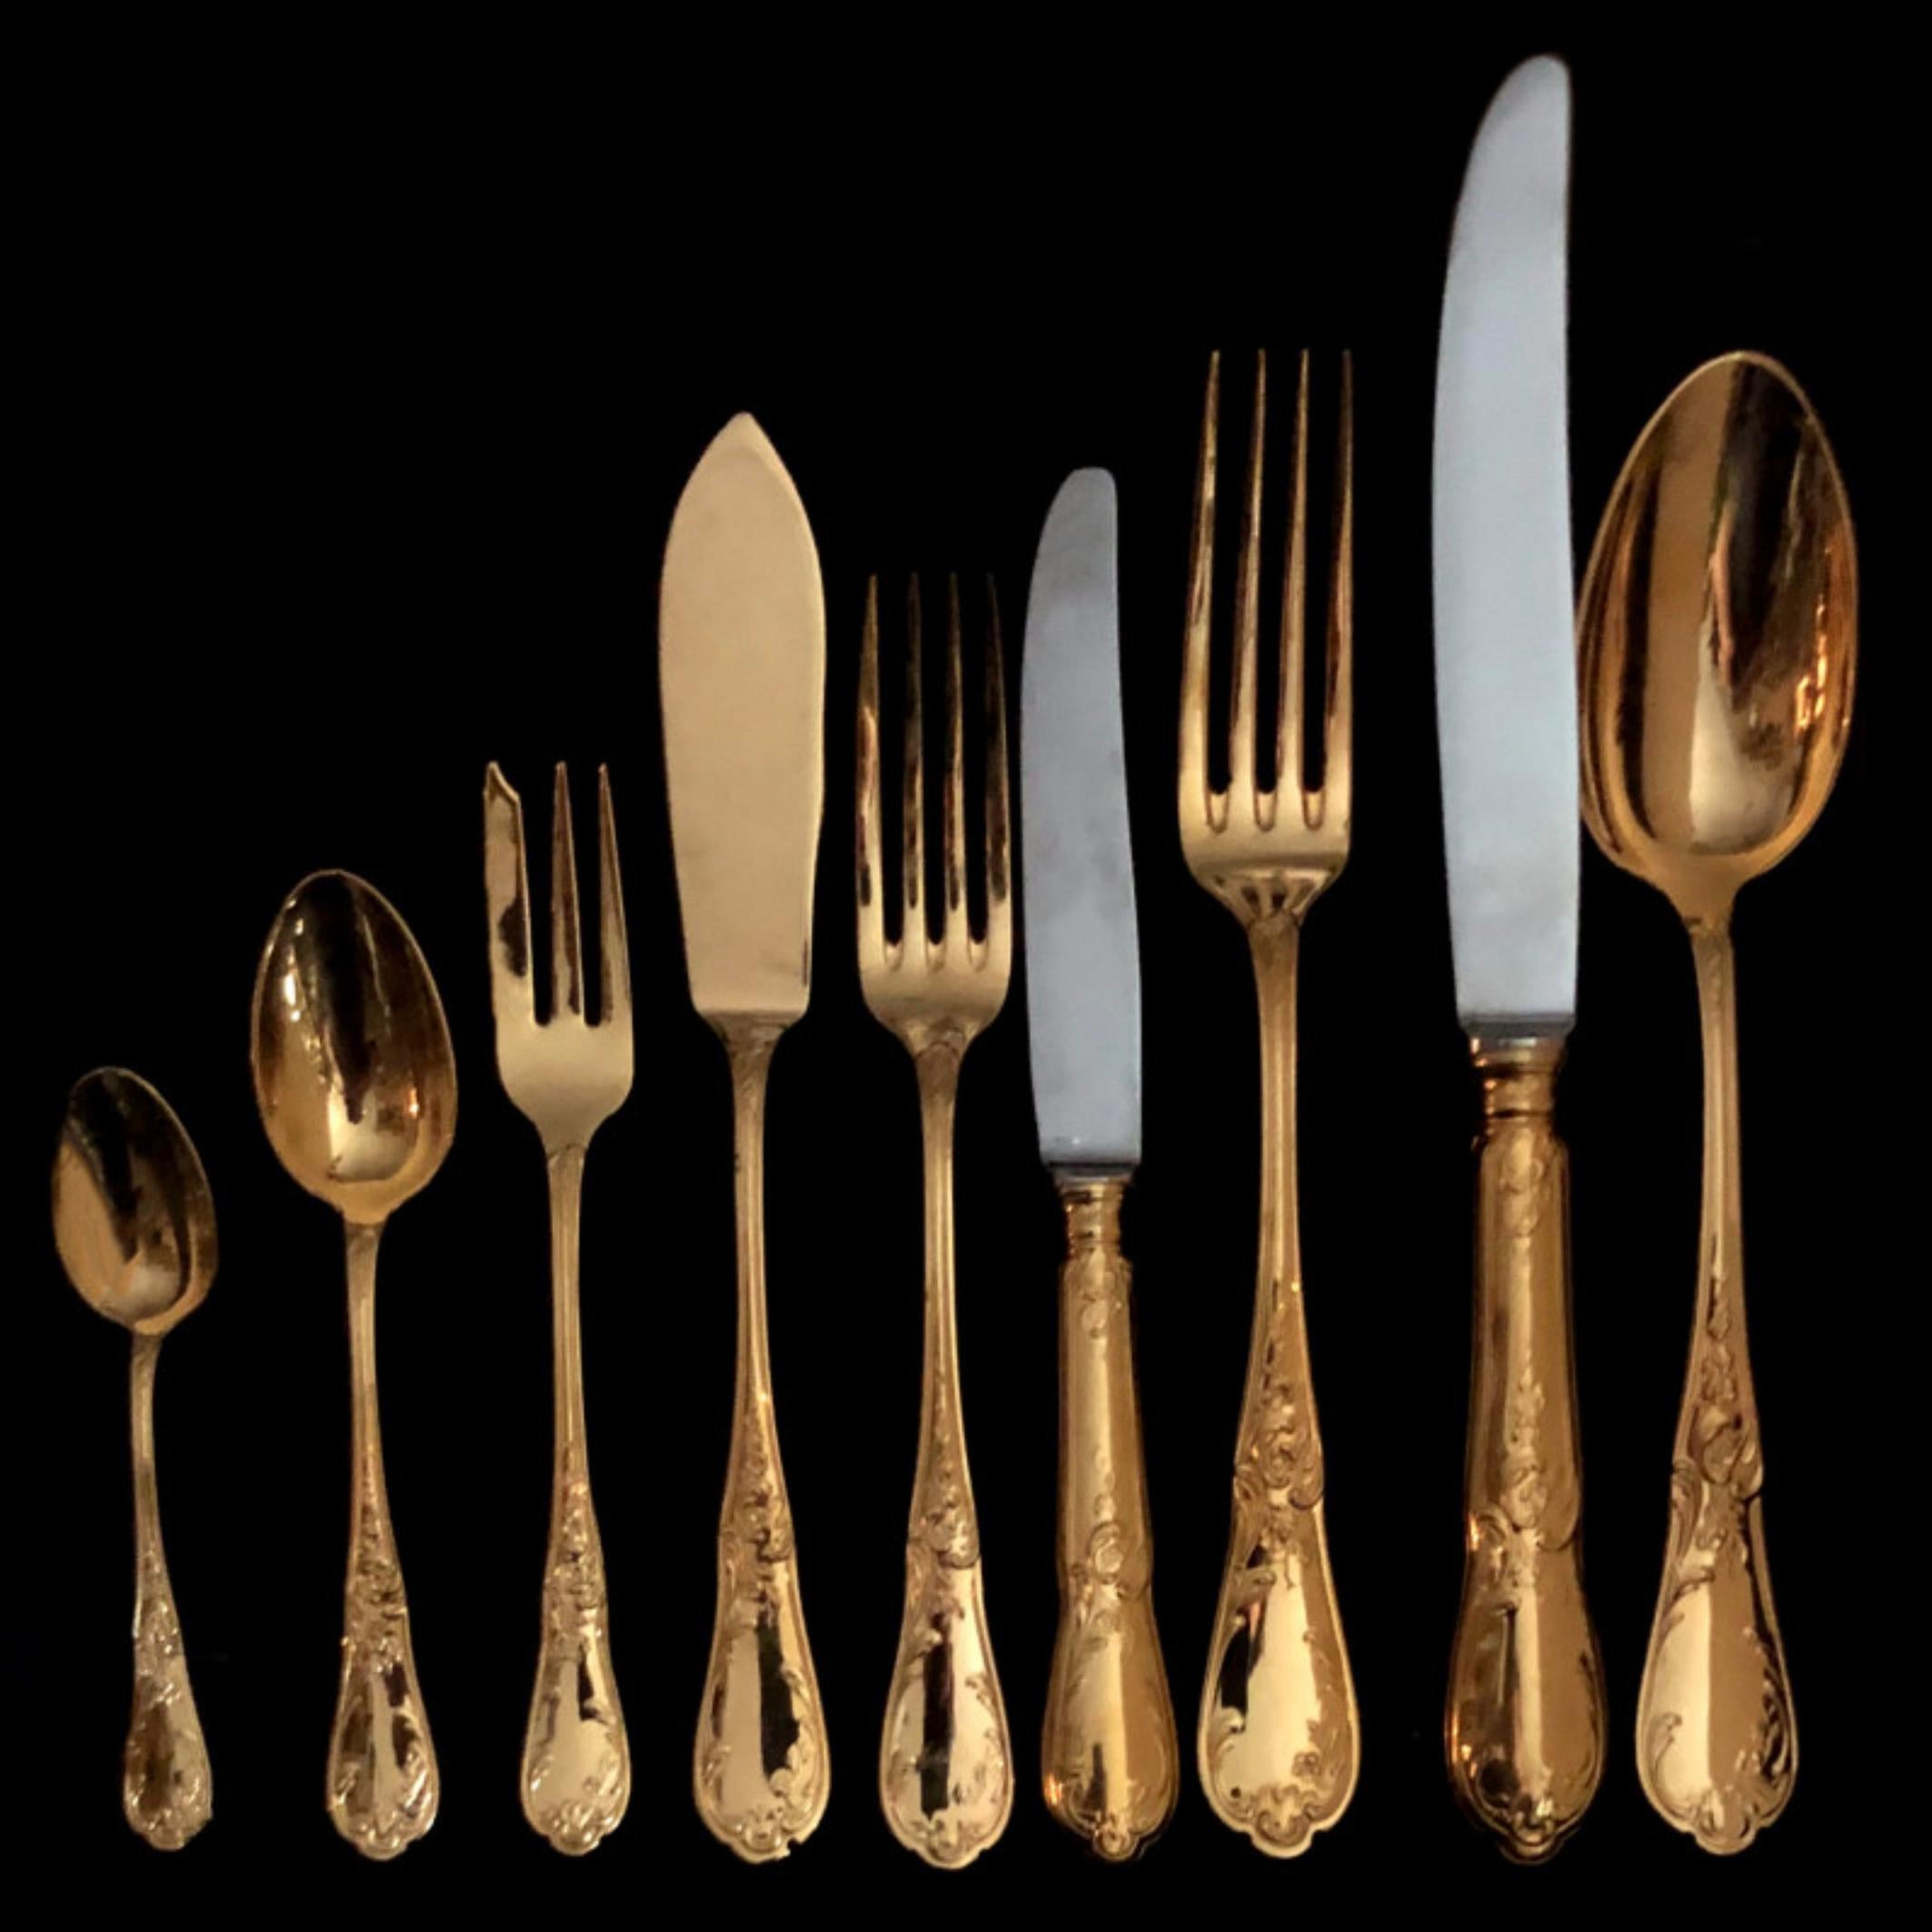 Typical French style the Rocaille matches so well with all fine porcelain, setting a romantic table with gold color fatware is making any party enjoyable, joyful.
This set is all gilded with real gold with high-quality blade solid stainless steel.